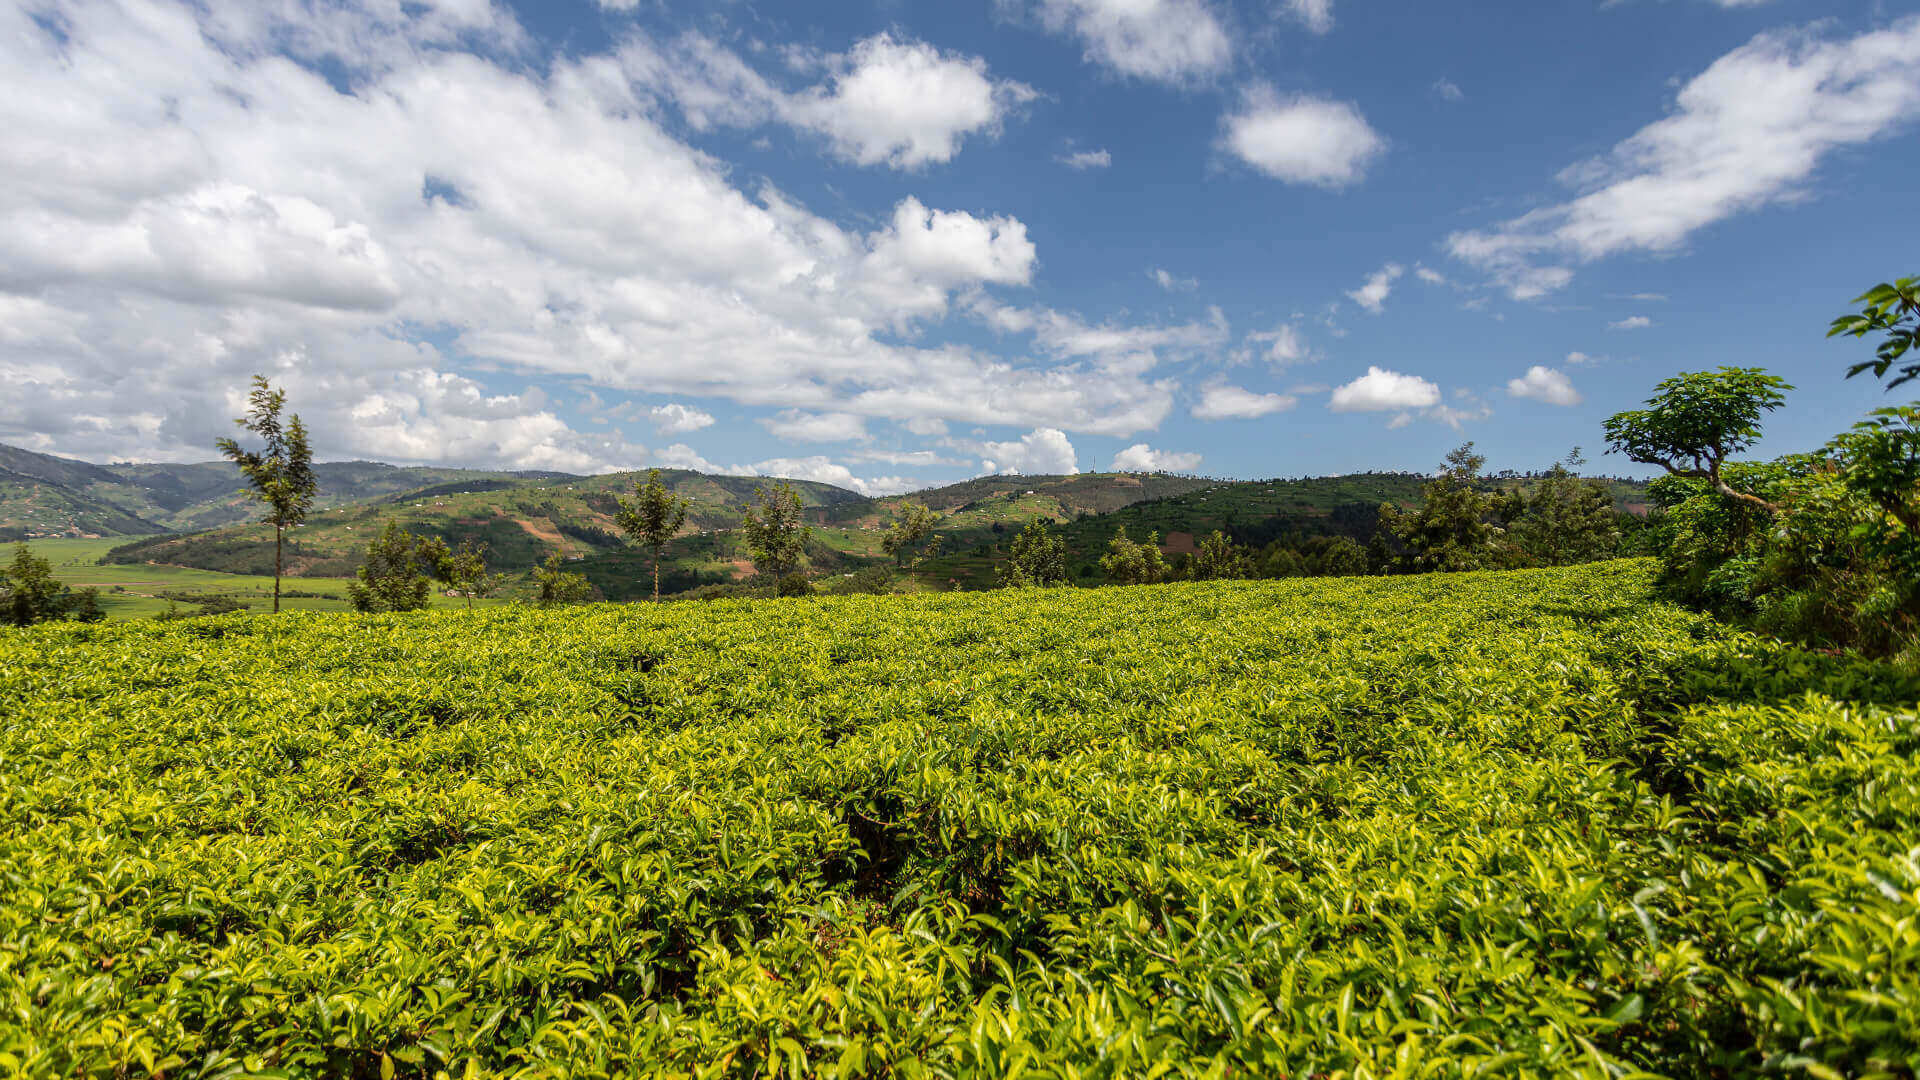 Wide-angle view of a vast tea plantation with vibrant green foliage under a blue sky with fluffy clouds, highlighting the natural landscape.